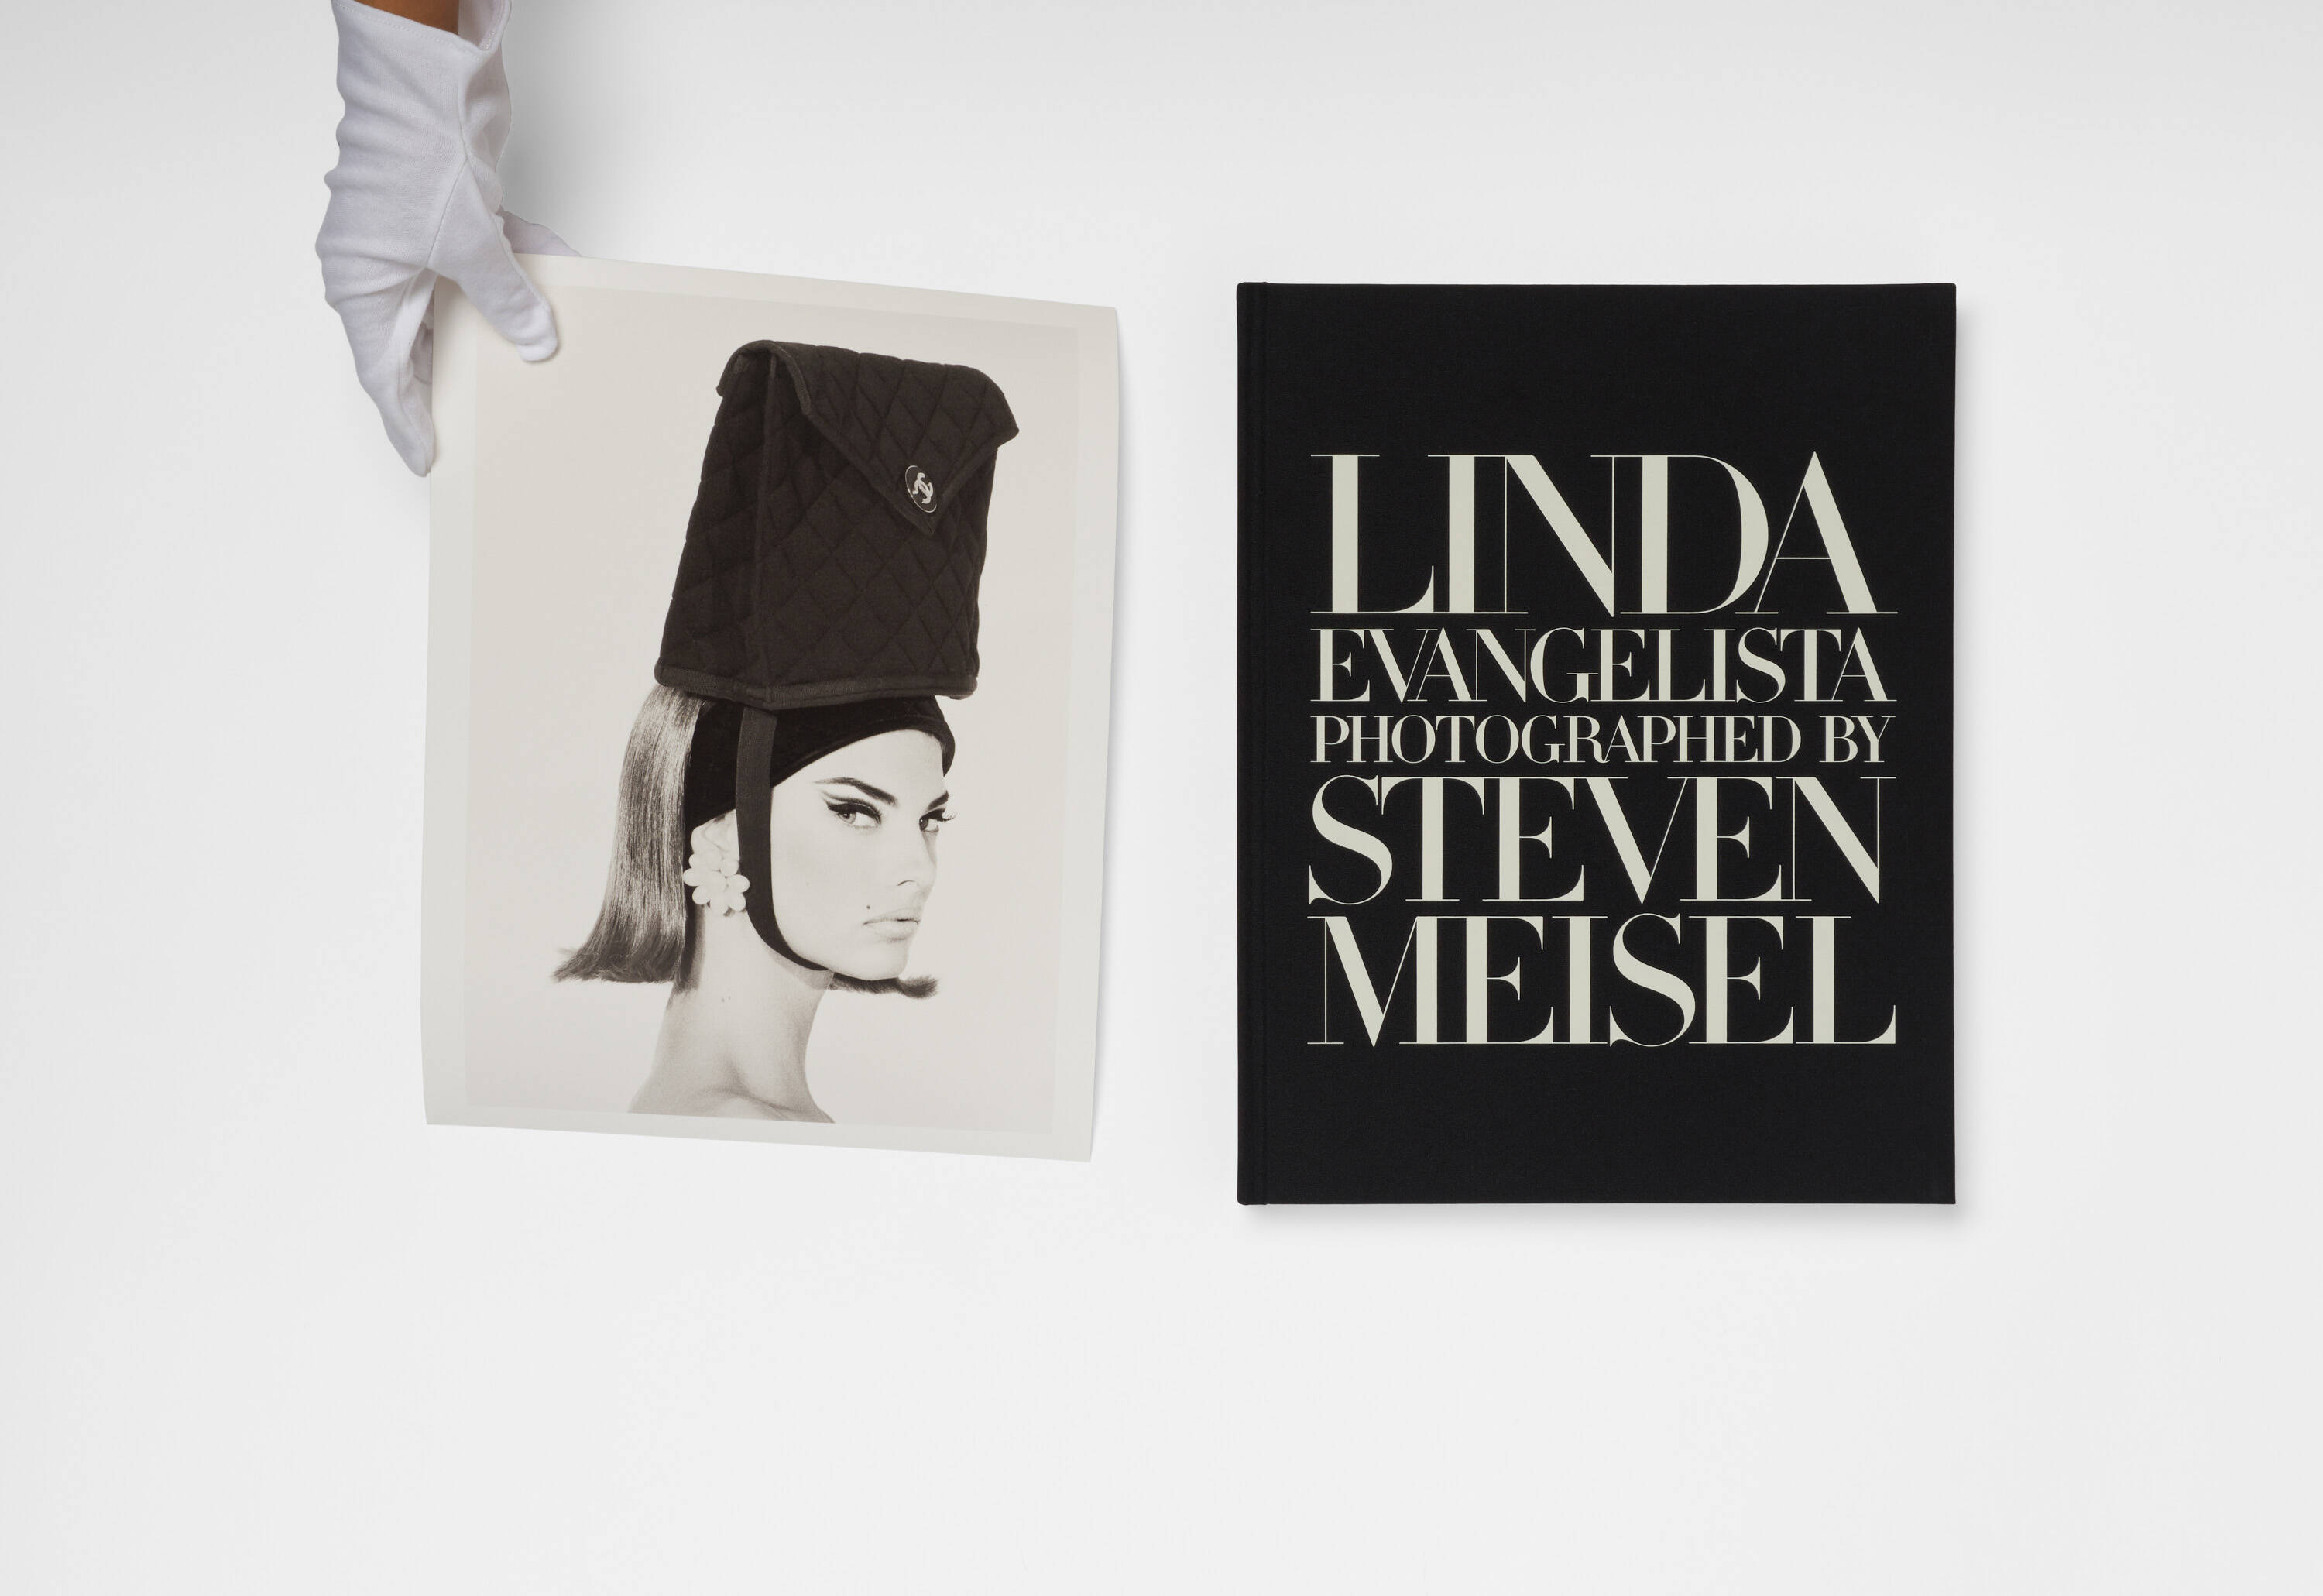 Steven Meisel releases limited edition photographic print featuring Linda Evangelista